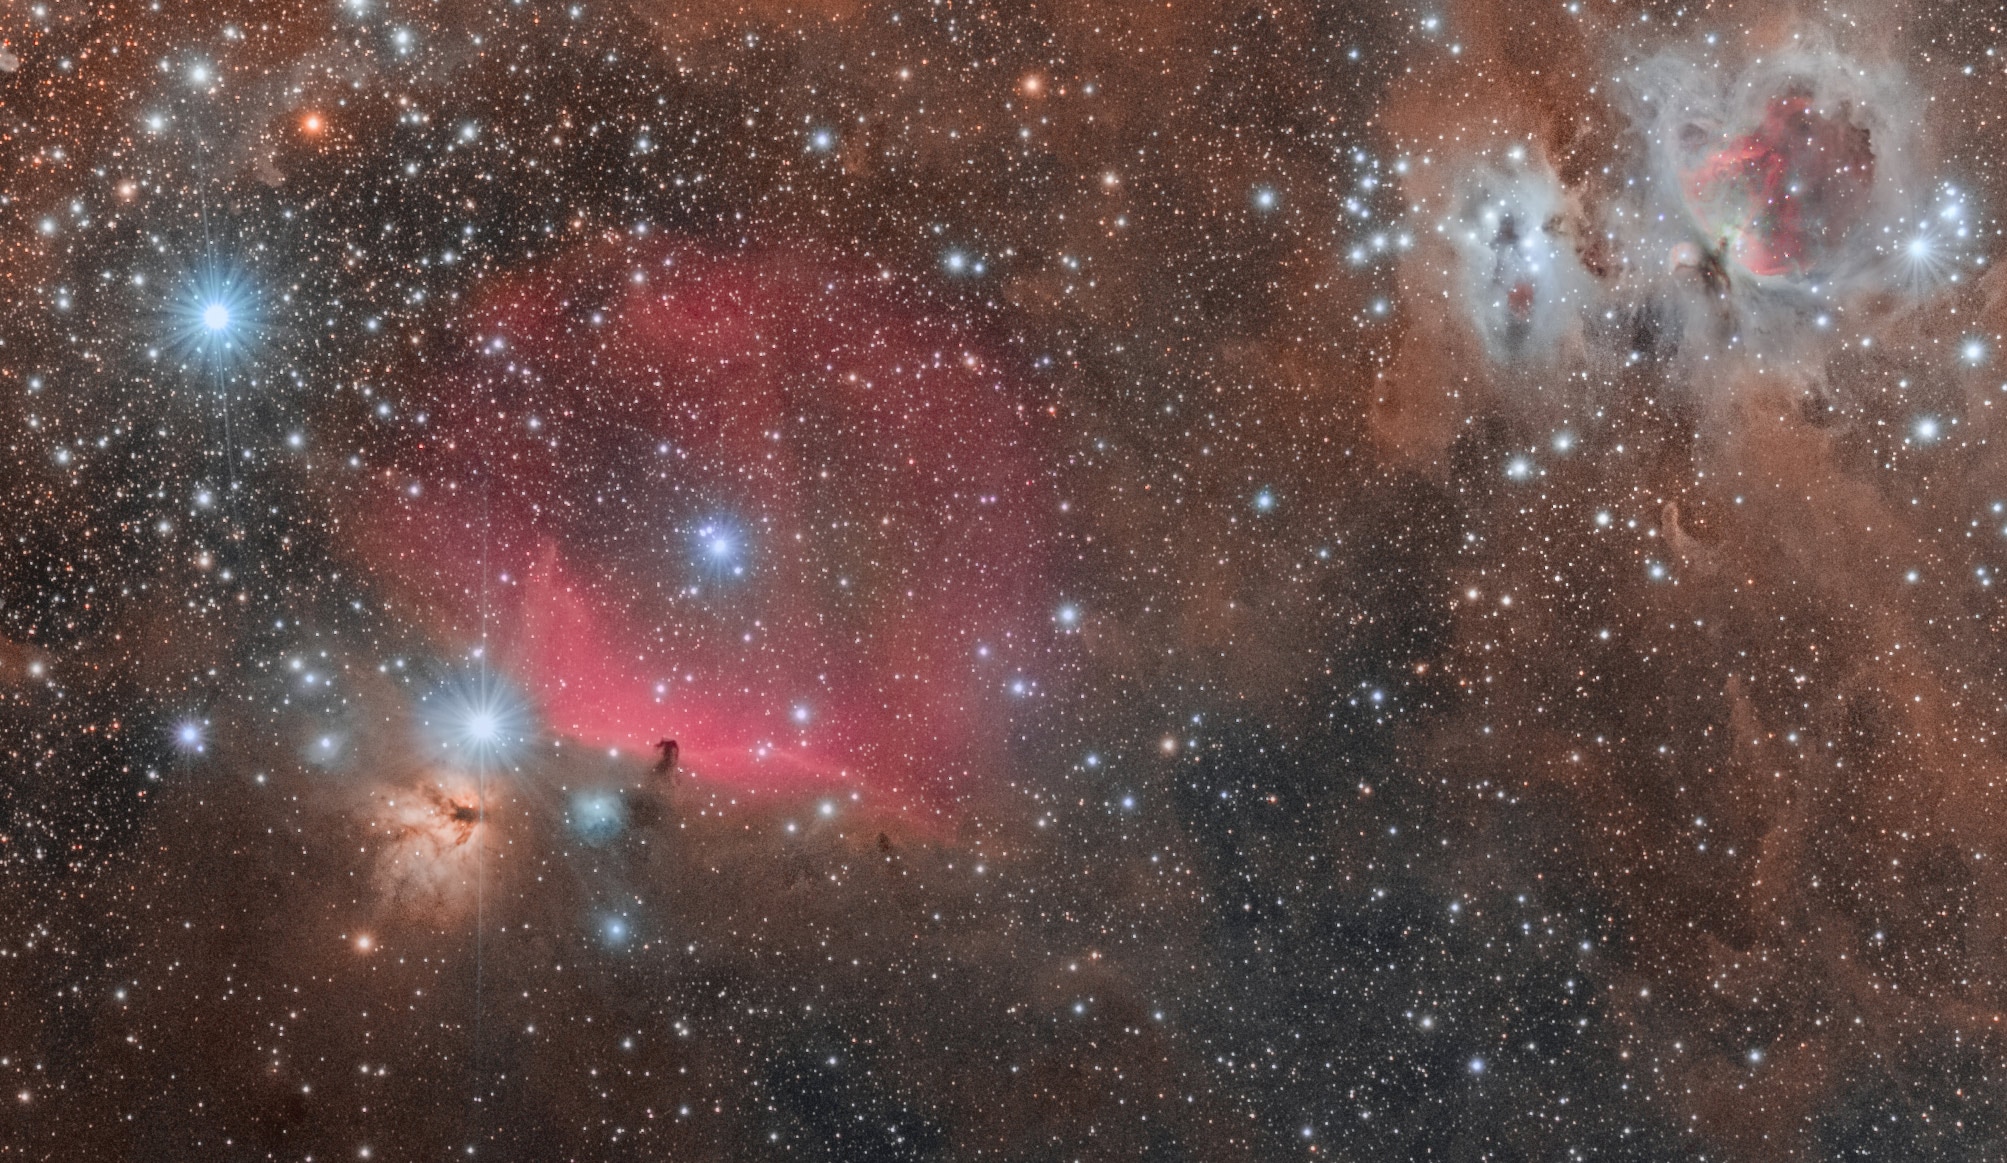 A spectacular wide-field shot of Orion's Belt, featuring the Horsehead, Flame, and Orion Nebula (and lots of other stuff too). Credit: Derek Demeter